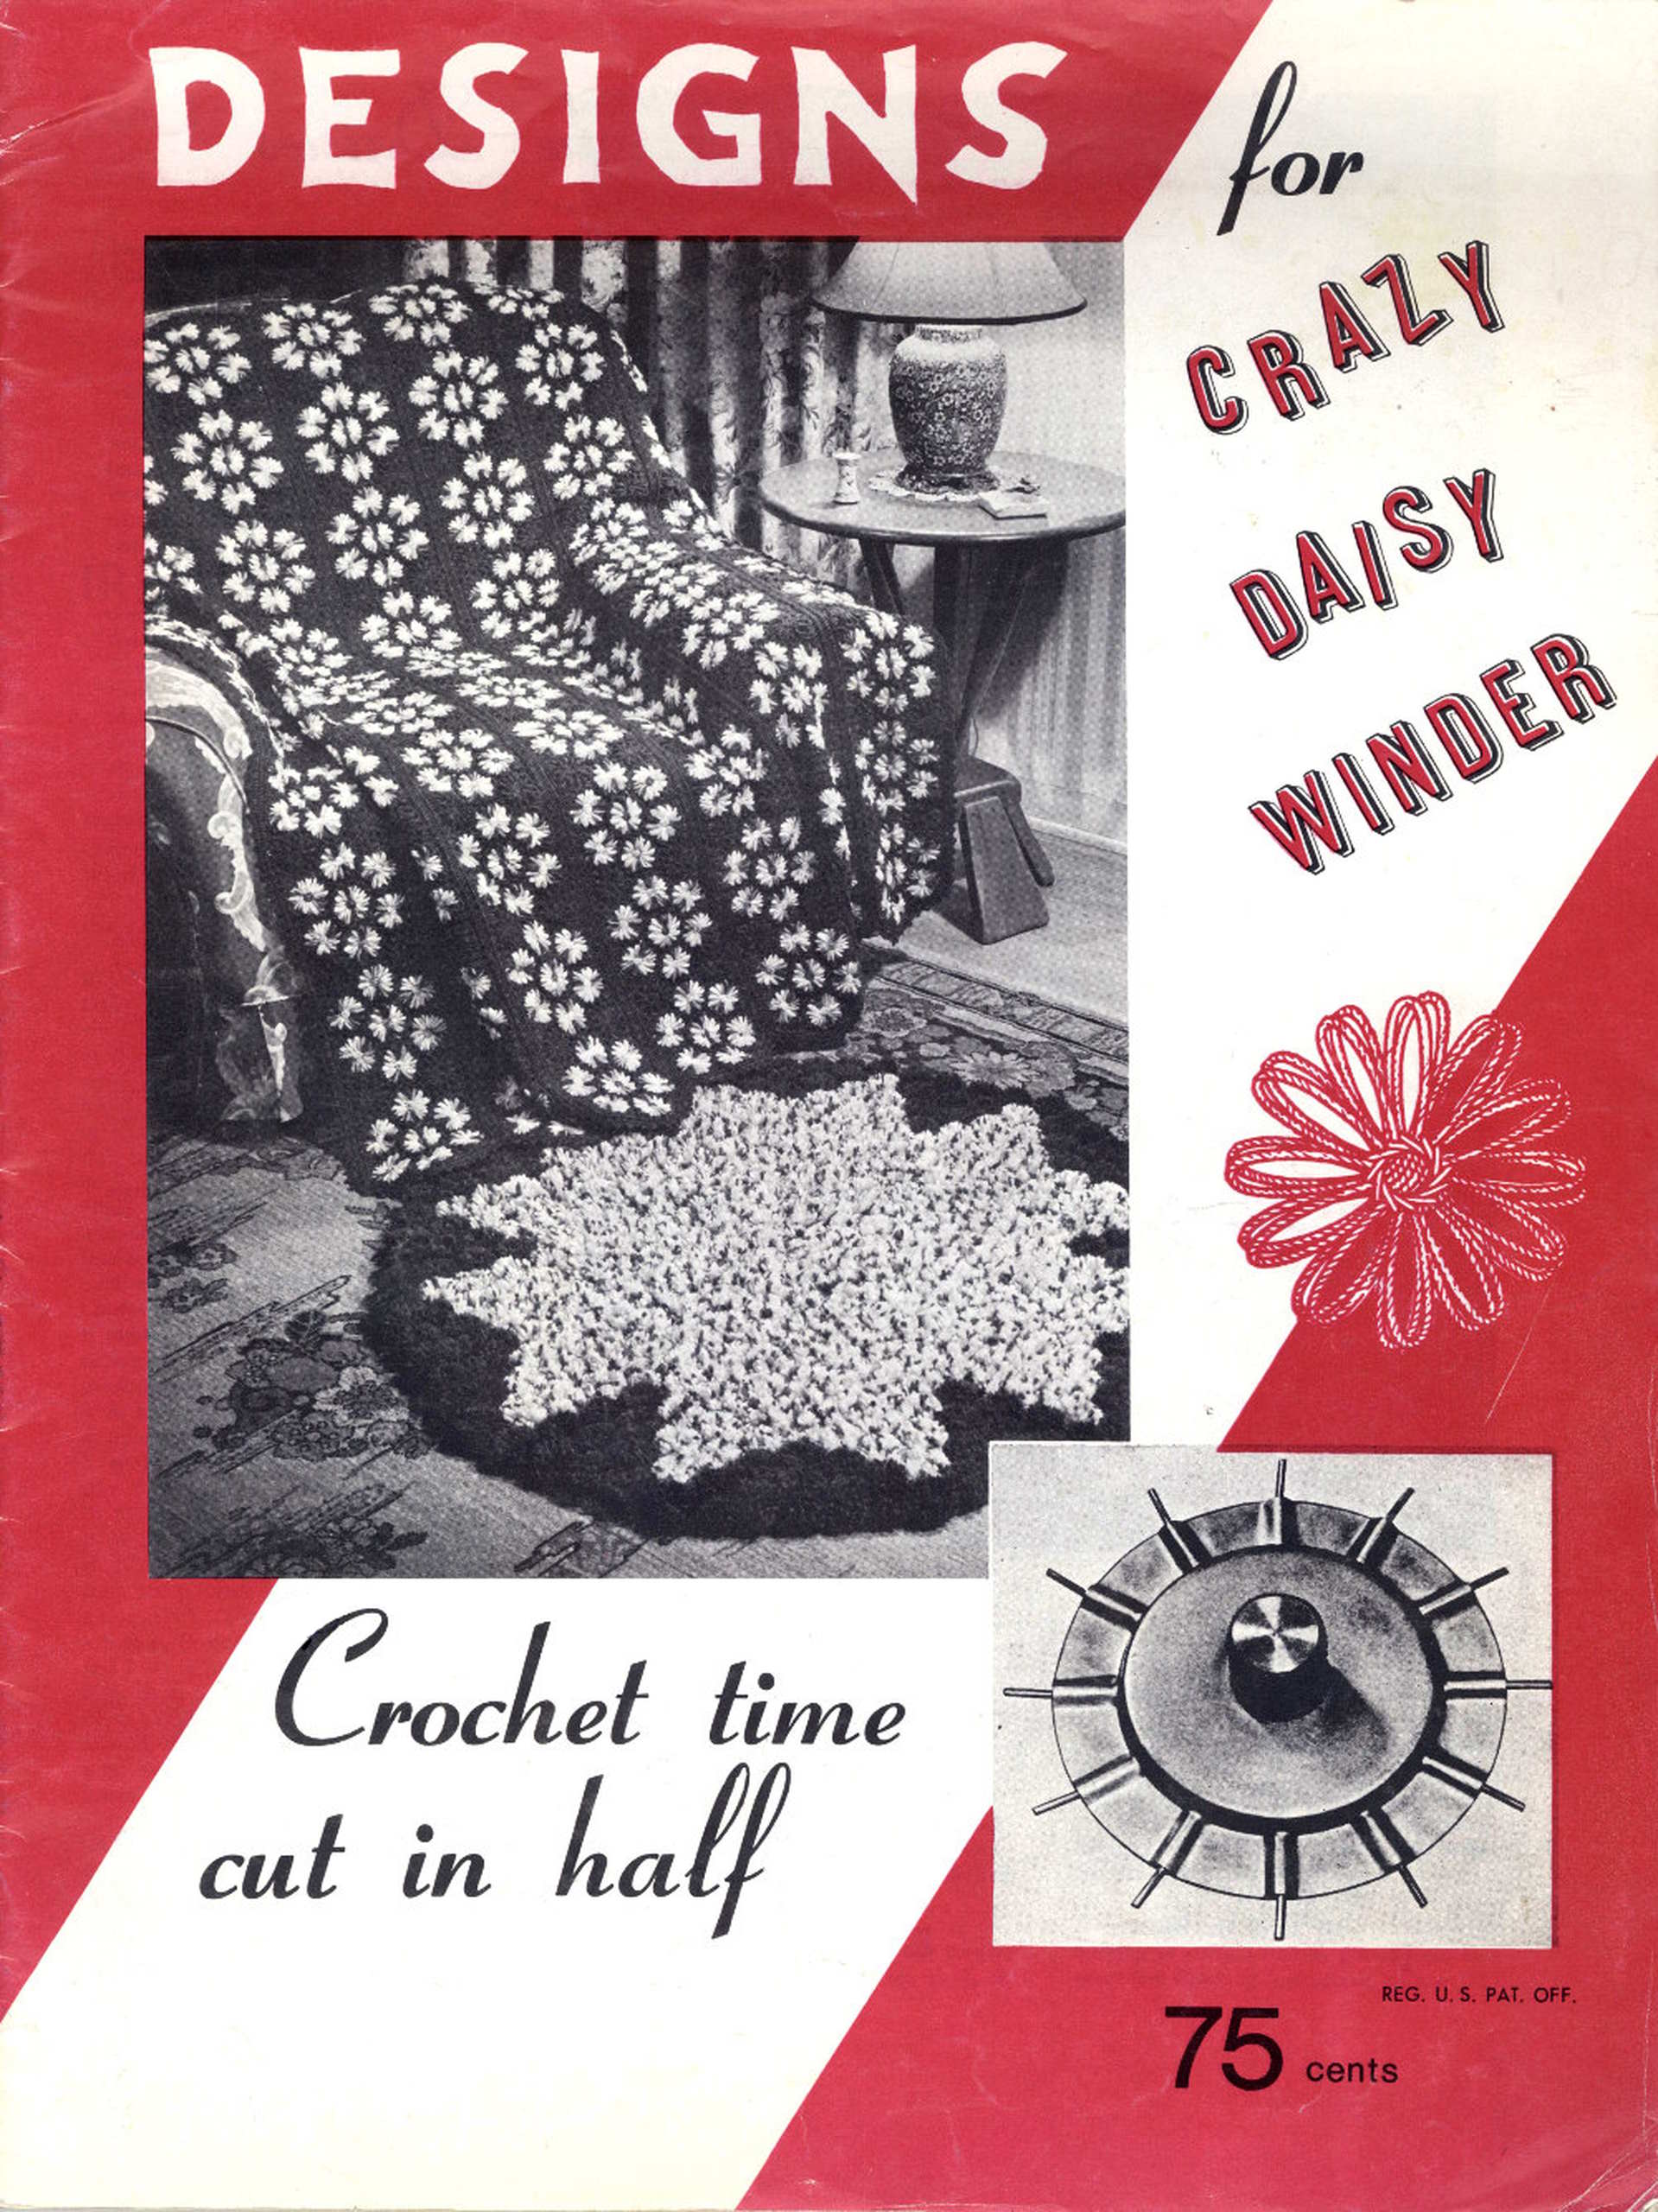 DESIGNS for CRAZY DAISY WINDER